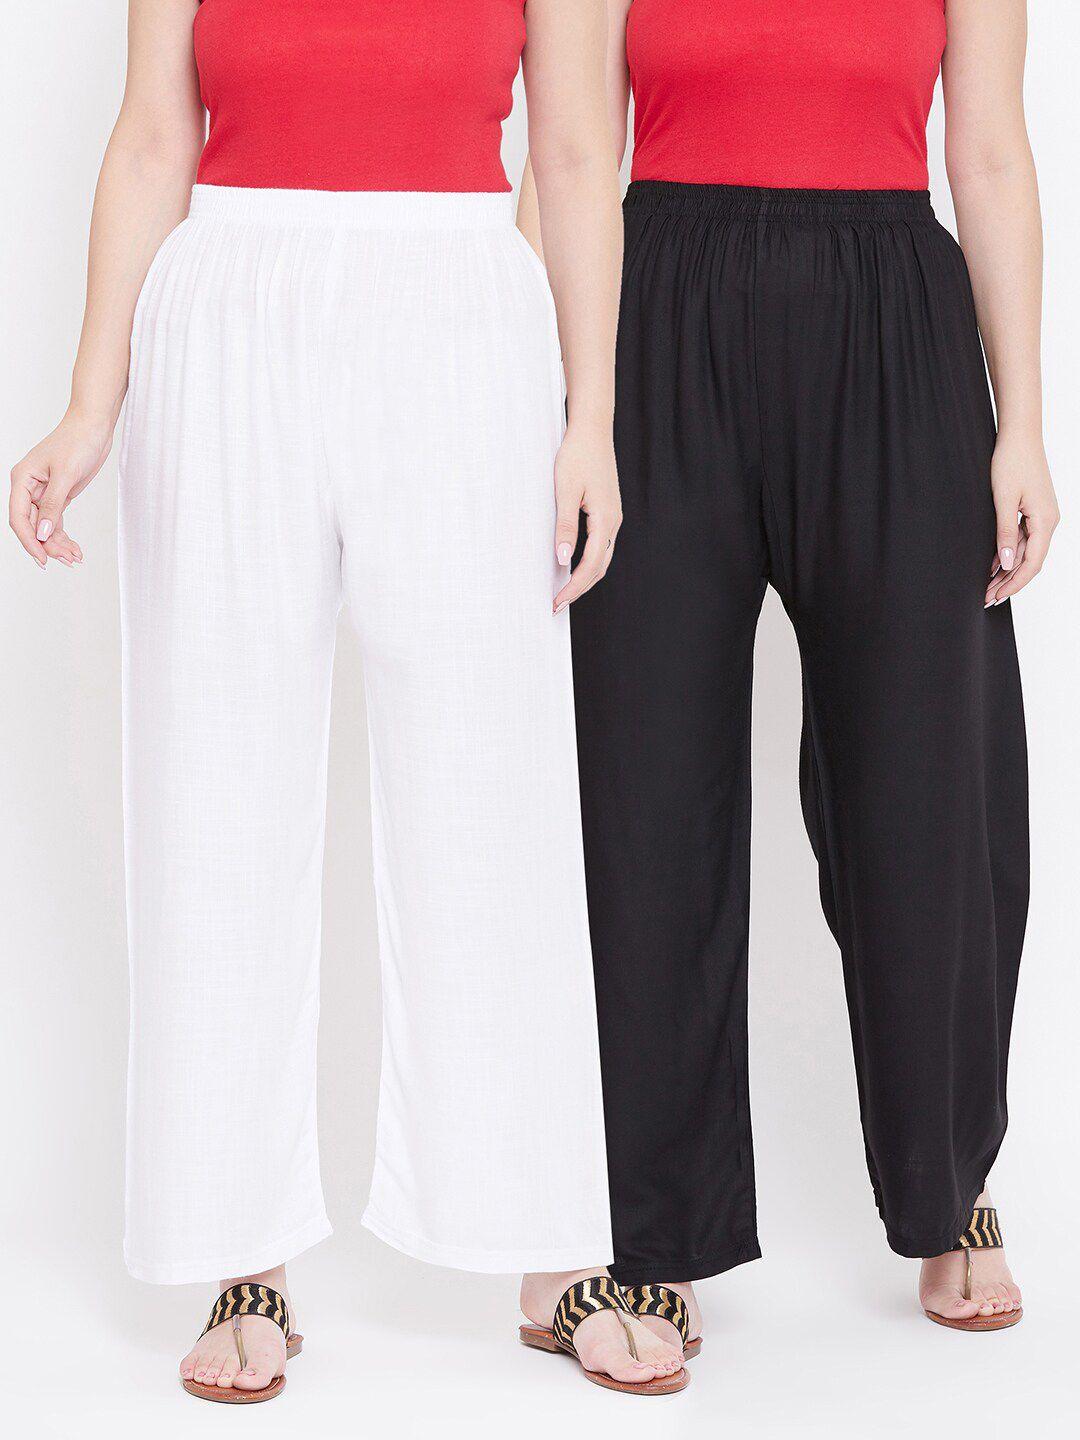 castle women black & white pack of 2 solid straight palazzos